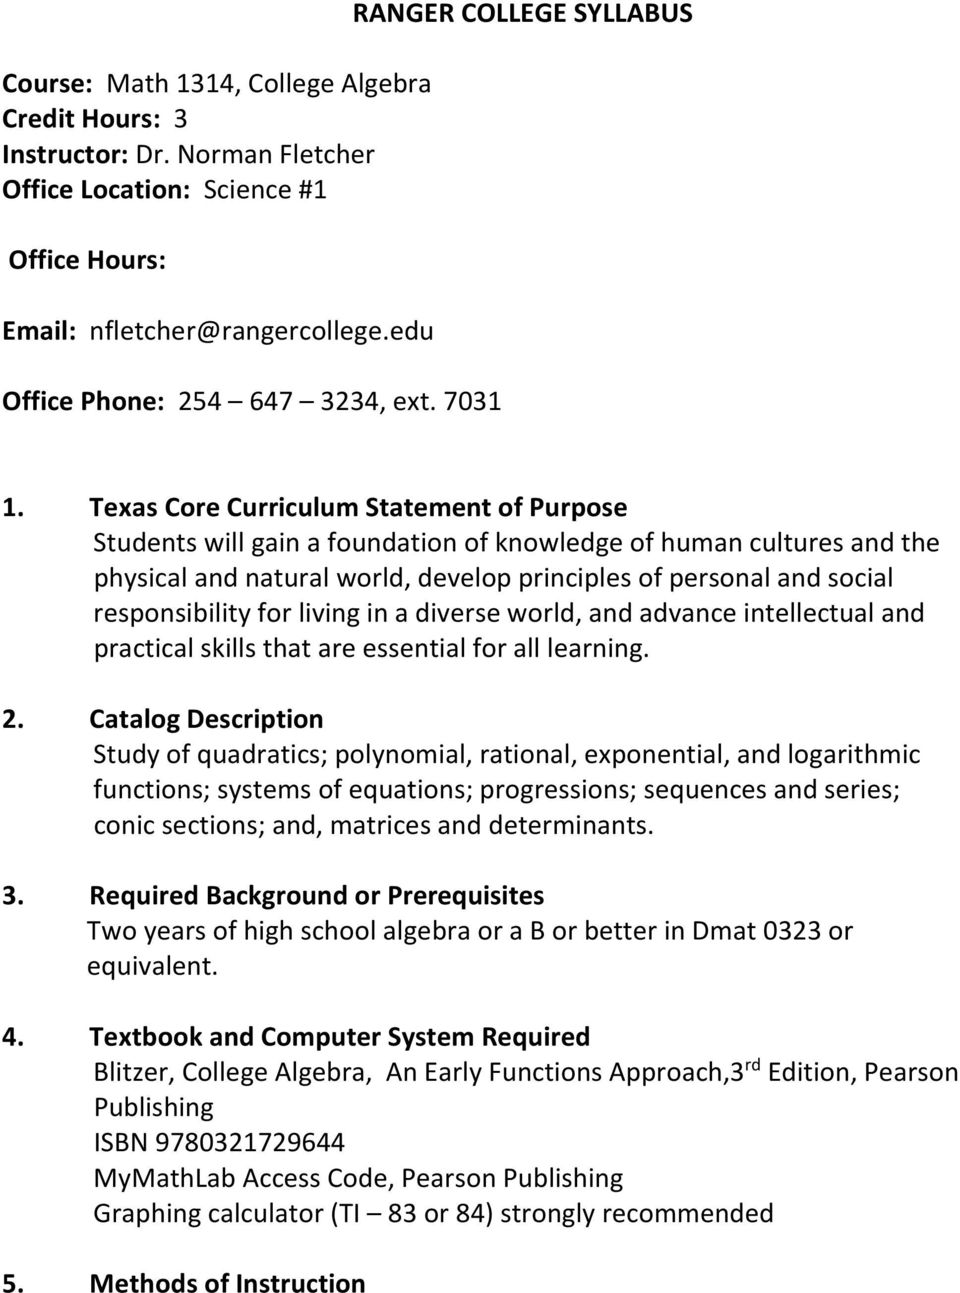 Texas Core Curriculum Statement of Purpose Students will gain a foundation of knowledge of human cultures and the physical and natural world, develop principles of personal and social responsibility